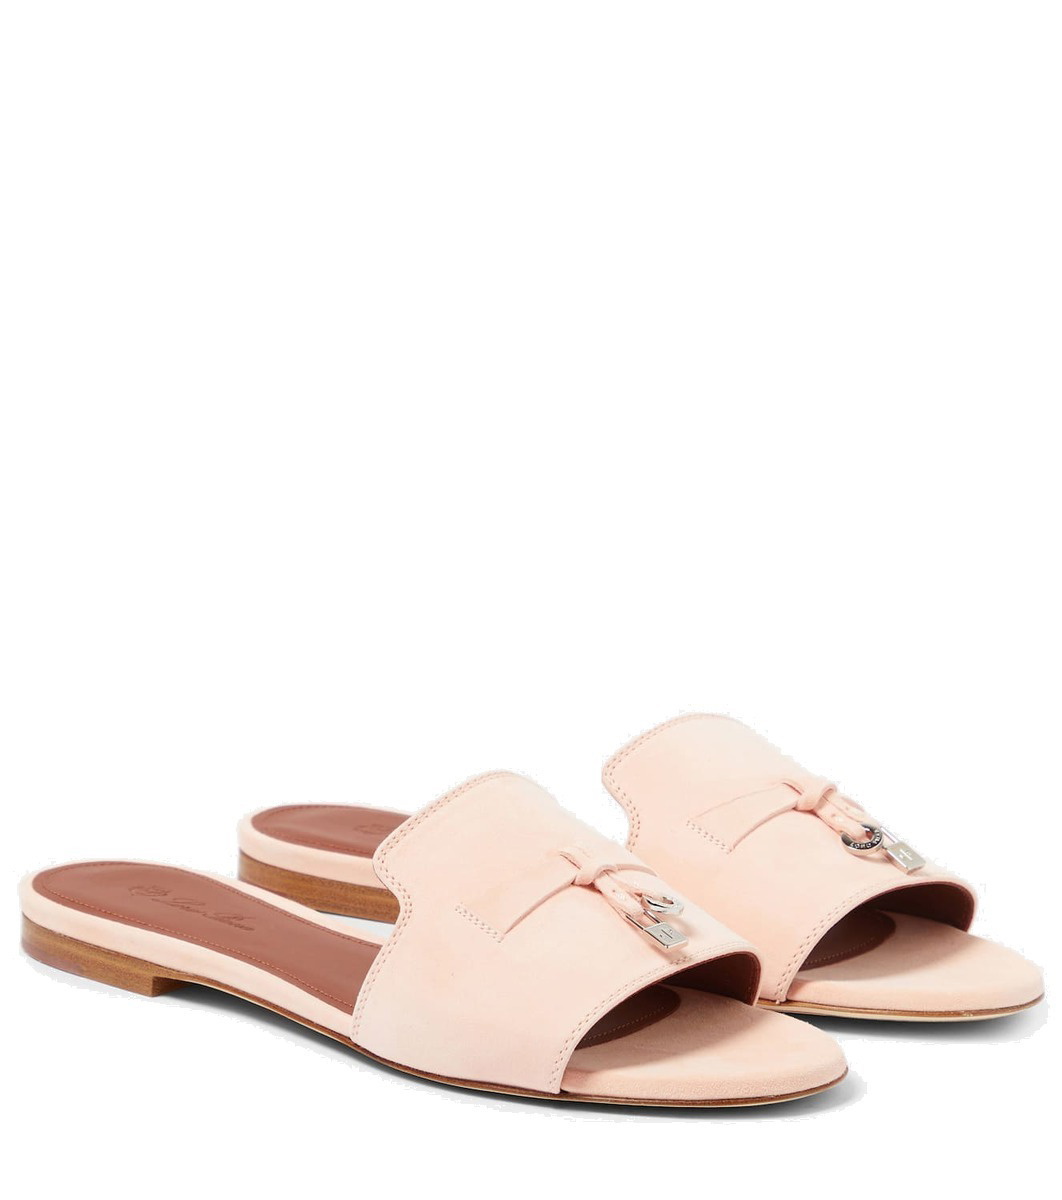 Sumie Leather Cross Sandals